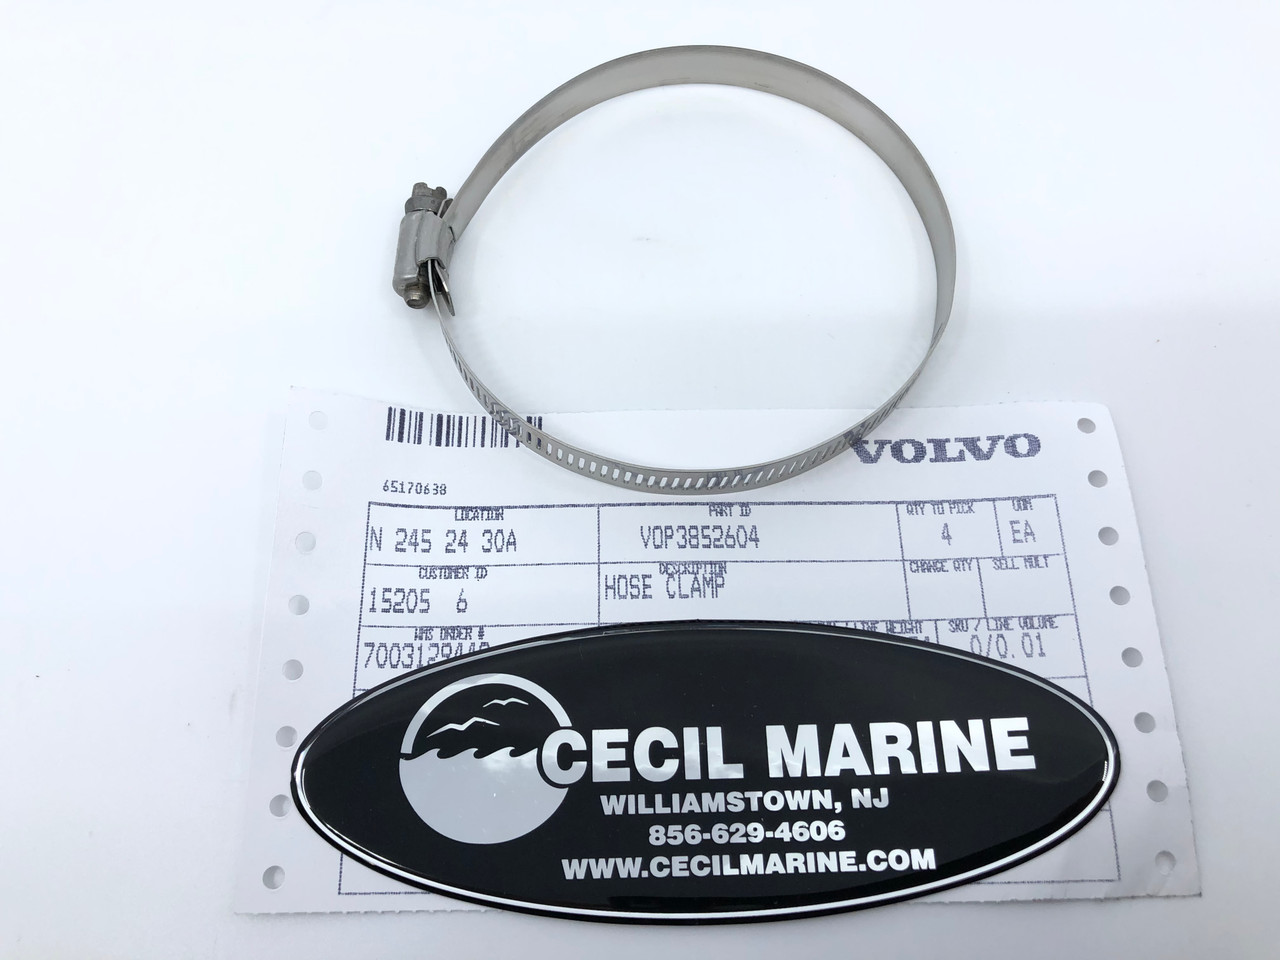 $7.99* GENUINE VOLVO no tax* HOSE CLAMP 3852604 *In Stock & Ready To Ship!